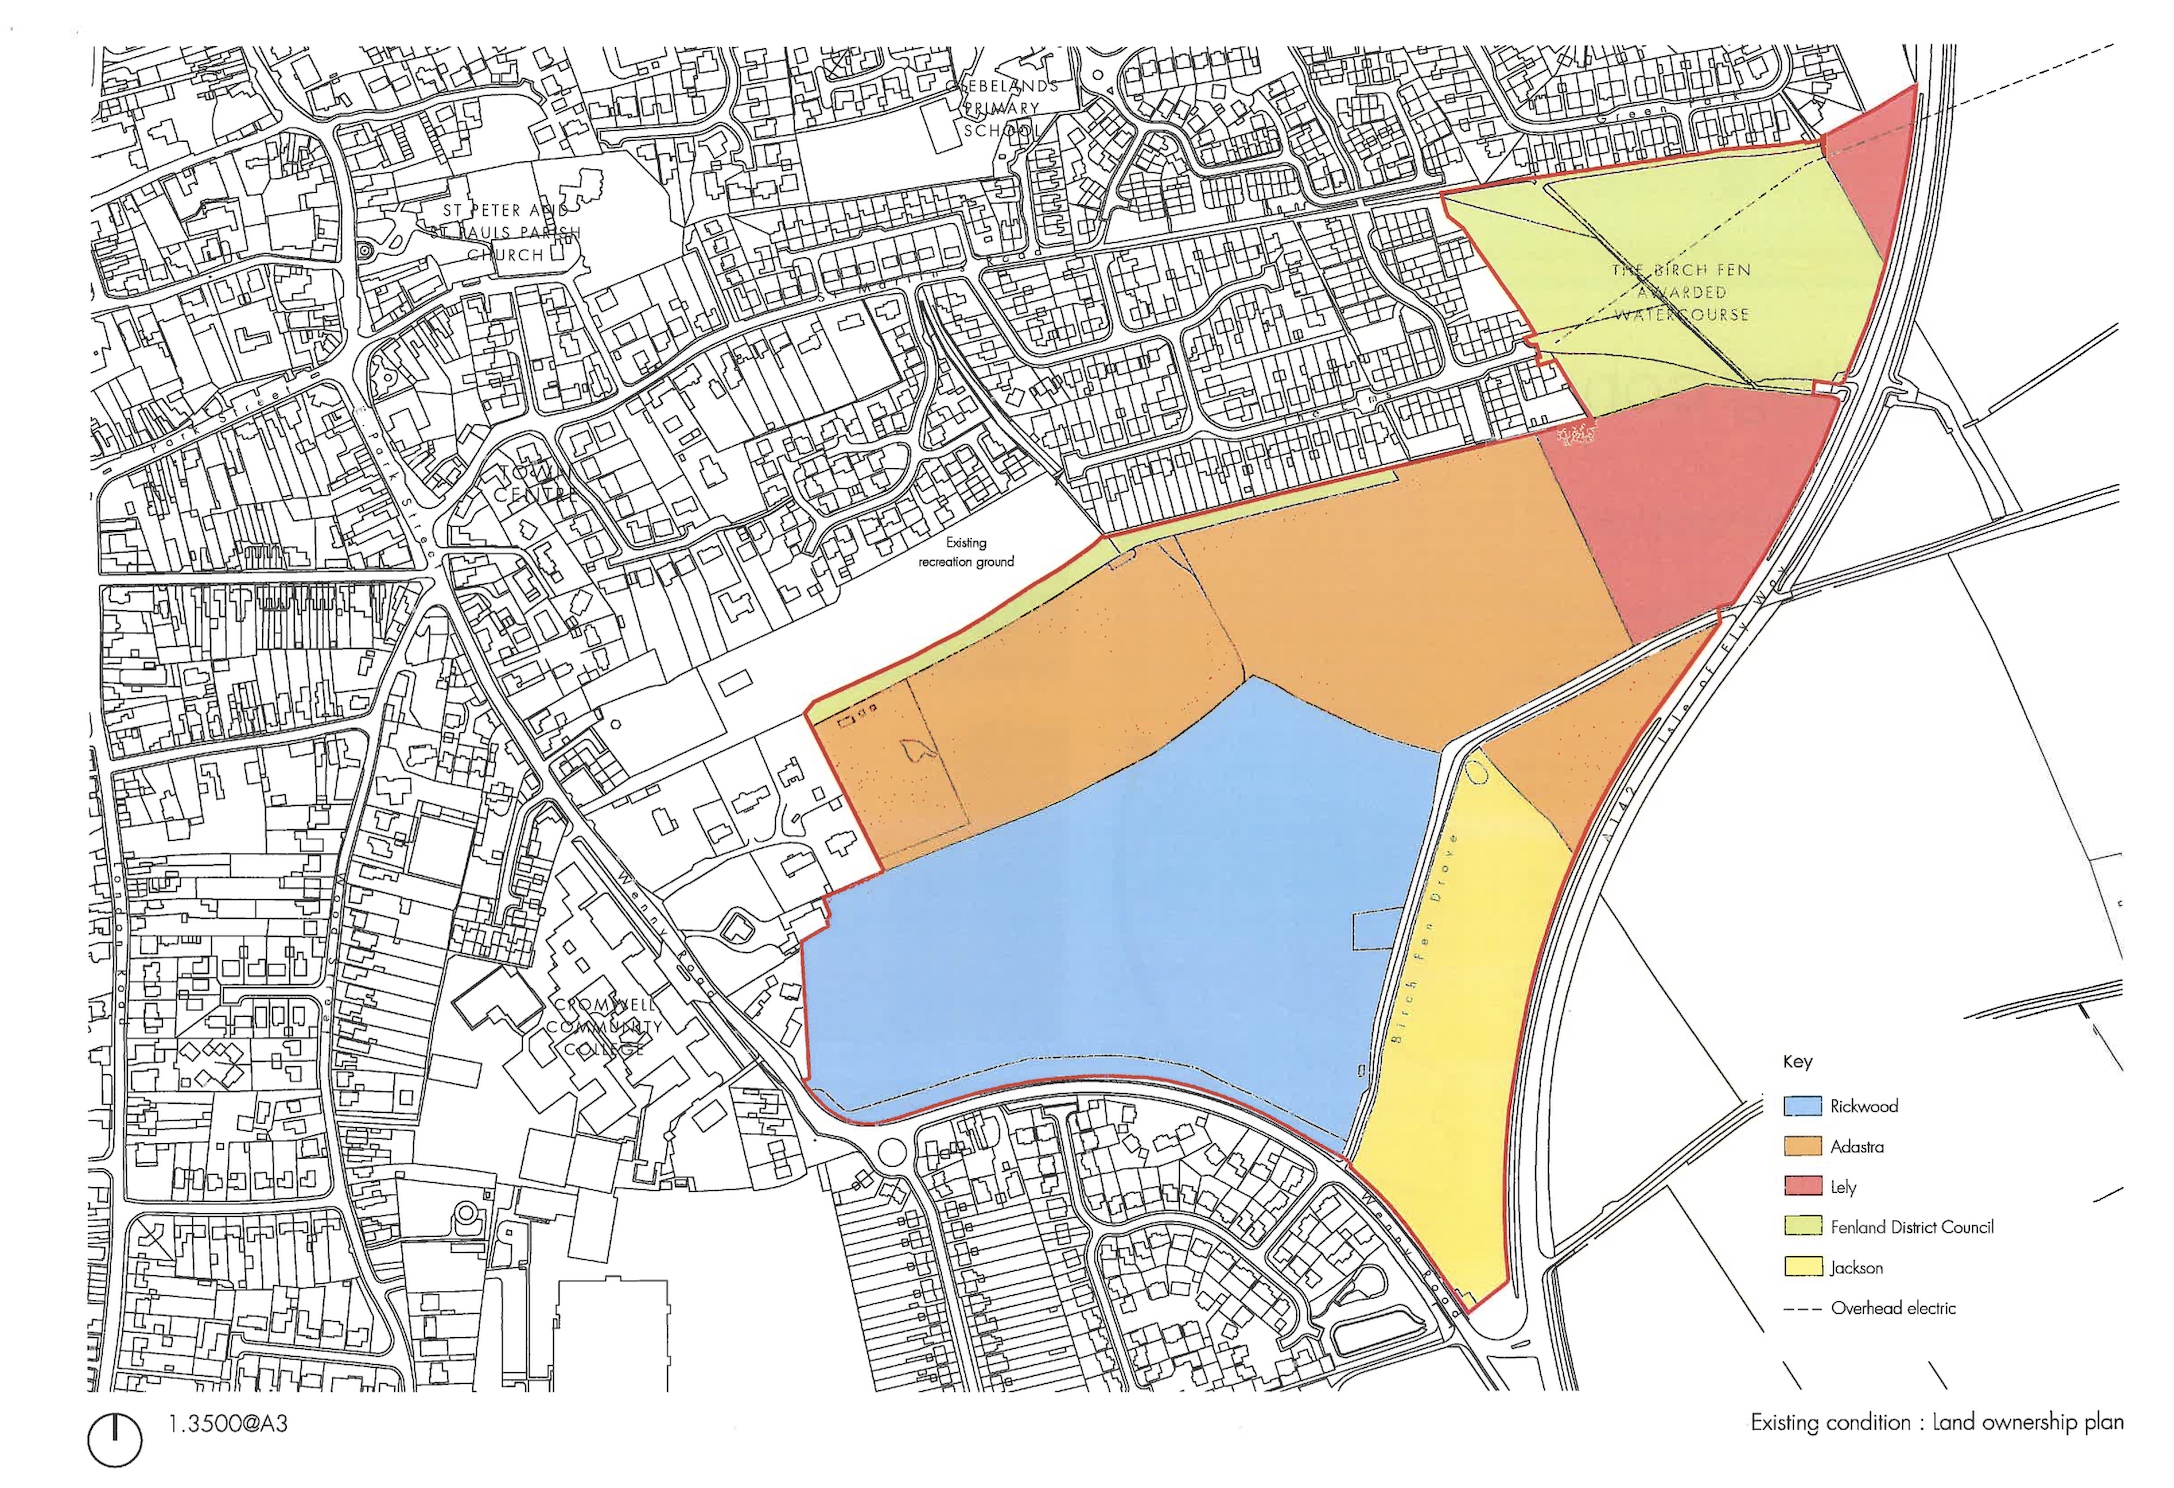 A diagram showing the ownership of land at the East Chatteris Broad Concept Plan site